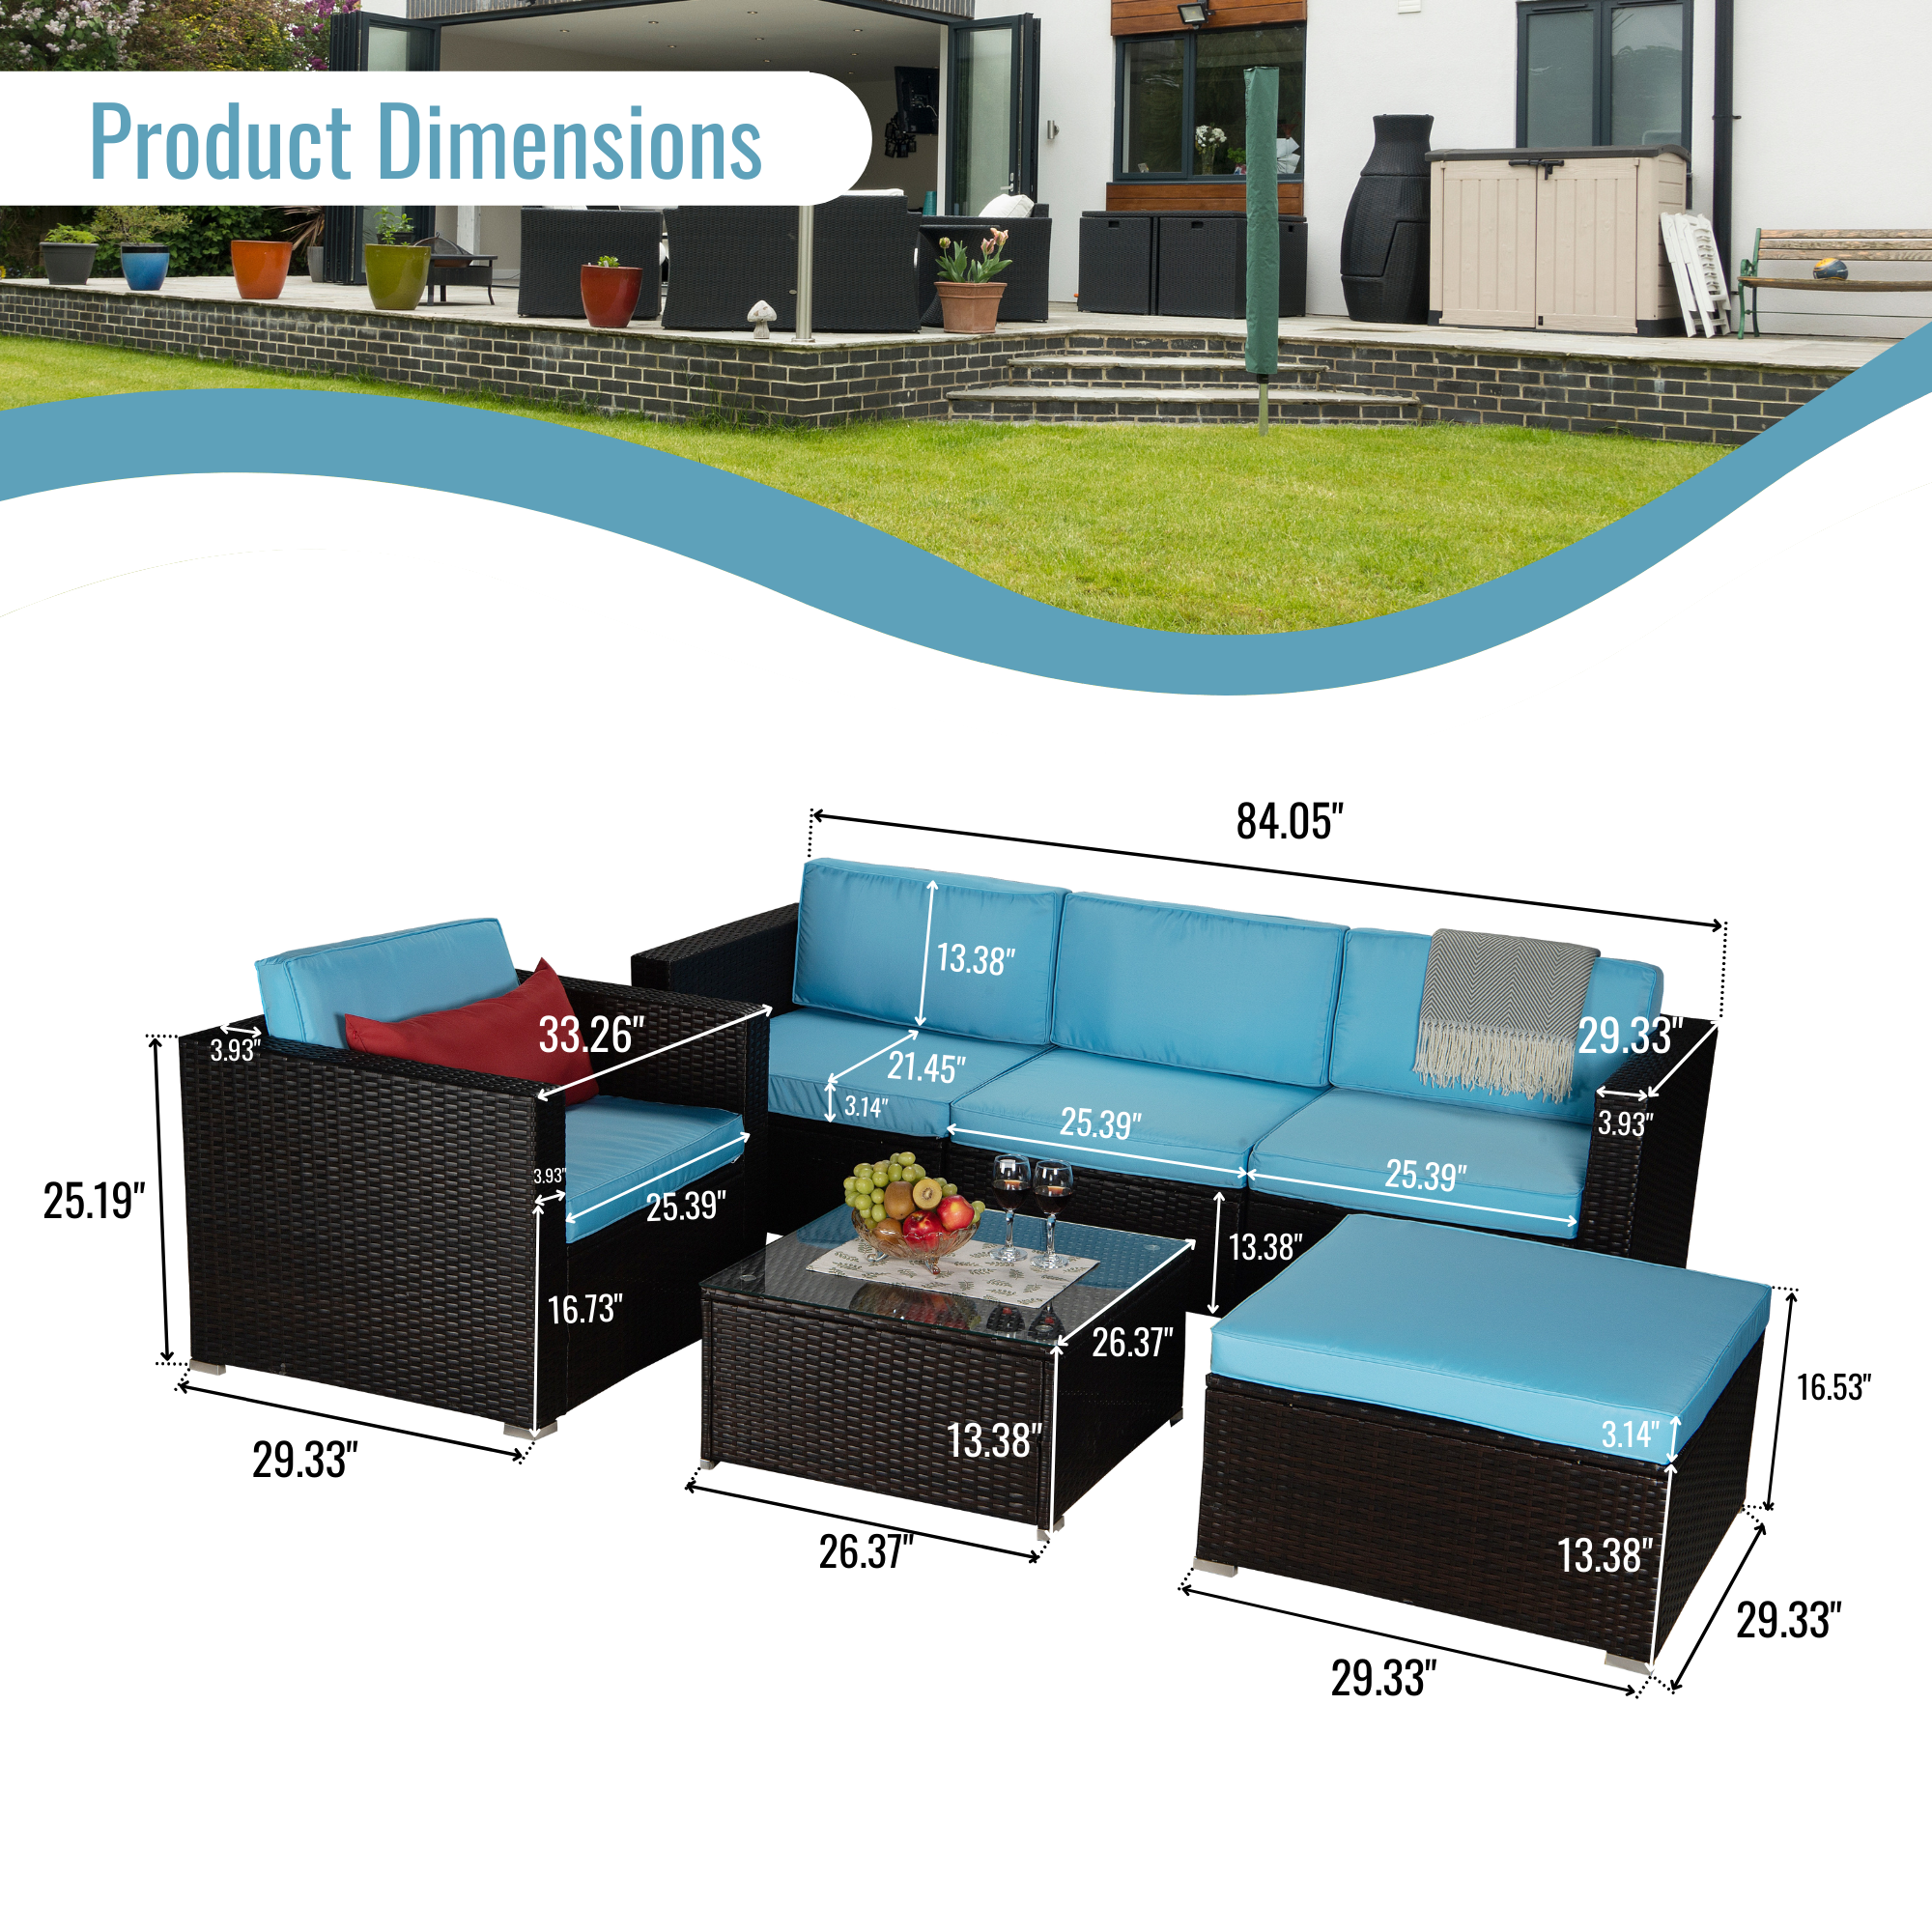 6-Piece Outdoor Patio Furniture Set PE Rattan Wicker Sectional Sofa Set with Coffee Table, Blue Cushioned and Red Pillow - image 5 of 8